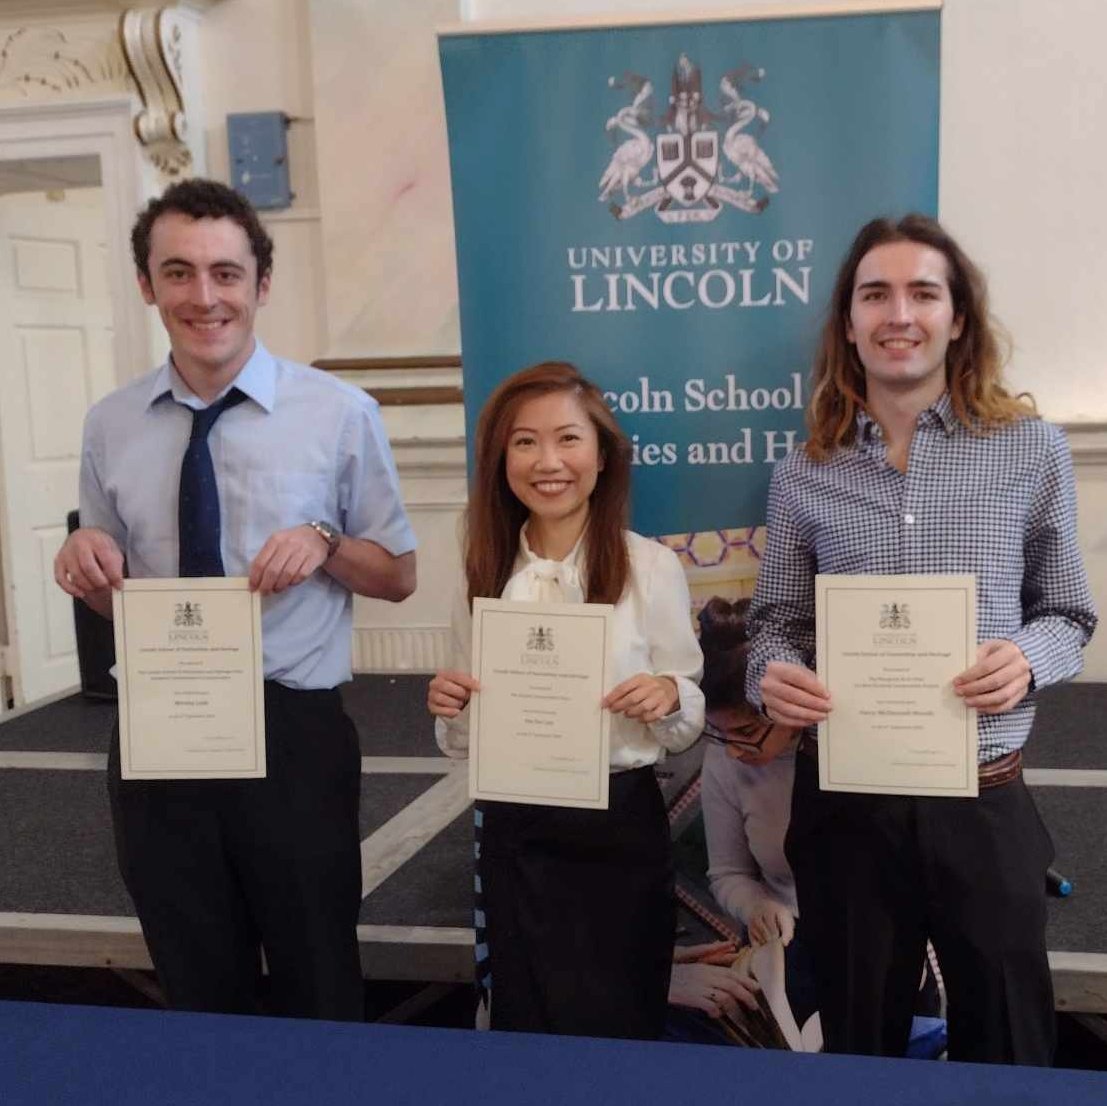 A big shout out to our three undergraduate academic prize winners - Wesley, Pei Pei, and Harry - on receiving their awards this morning! 🎉🤓👏 Enjoy your graduation ceremony this afternoon 🎓

#uolgrad